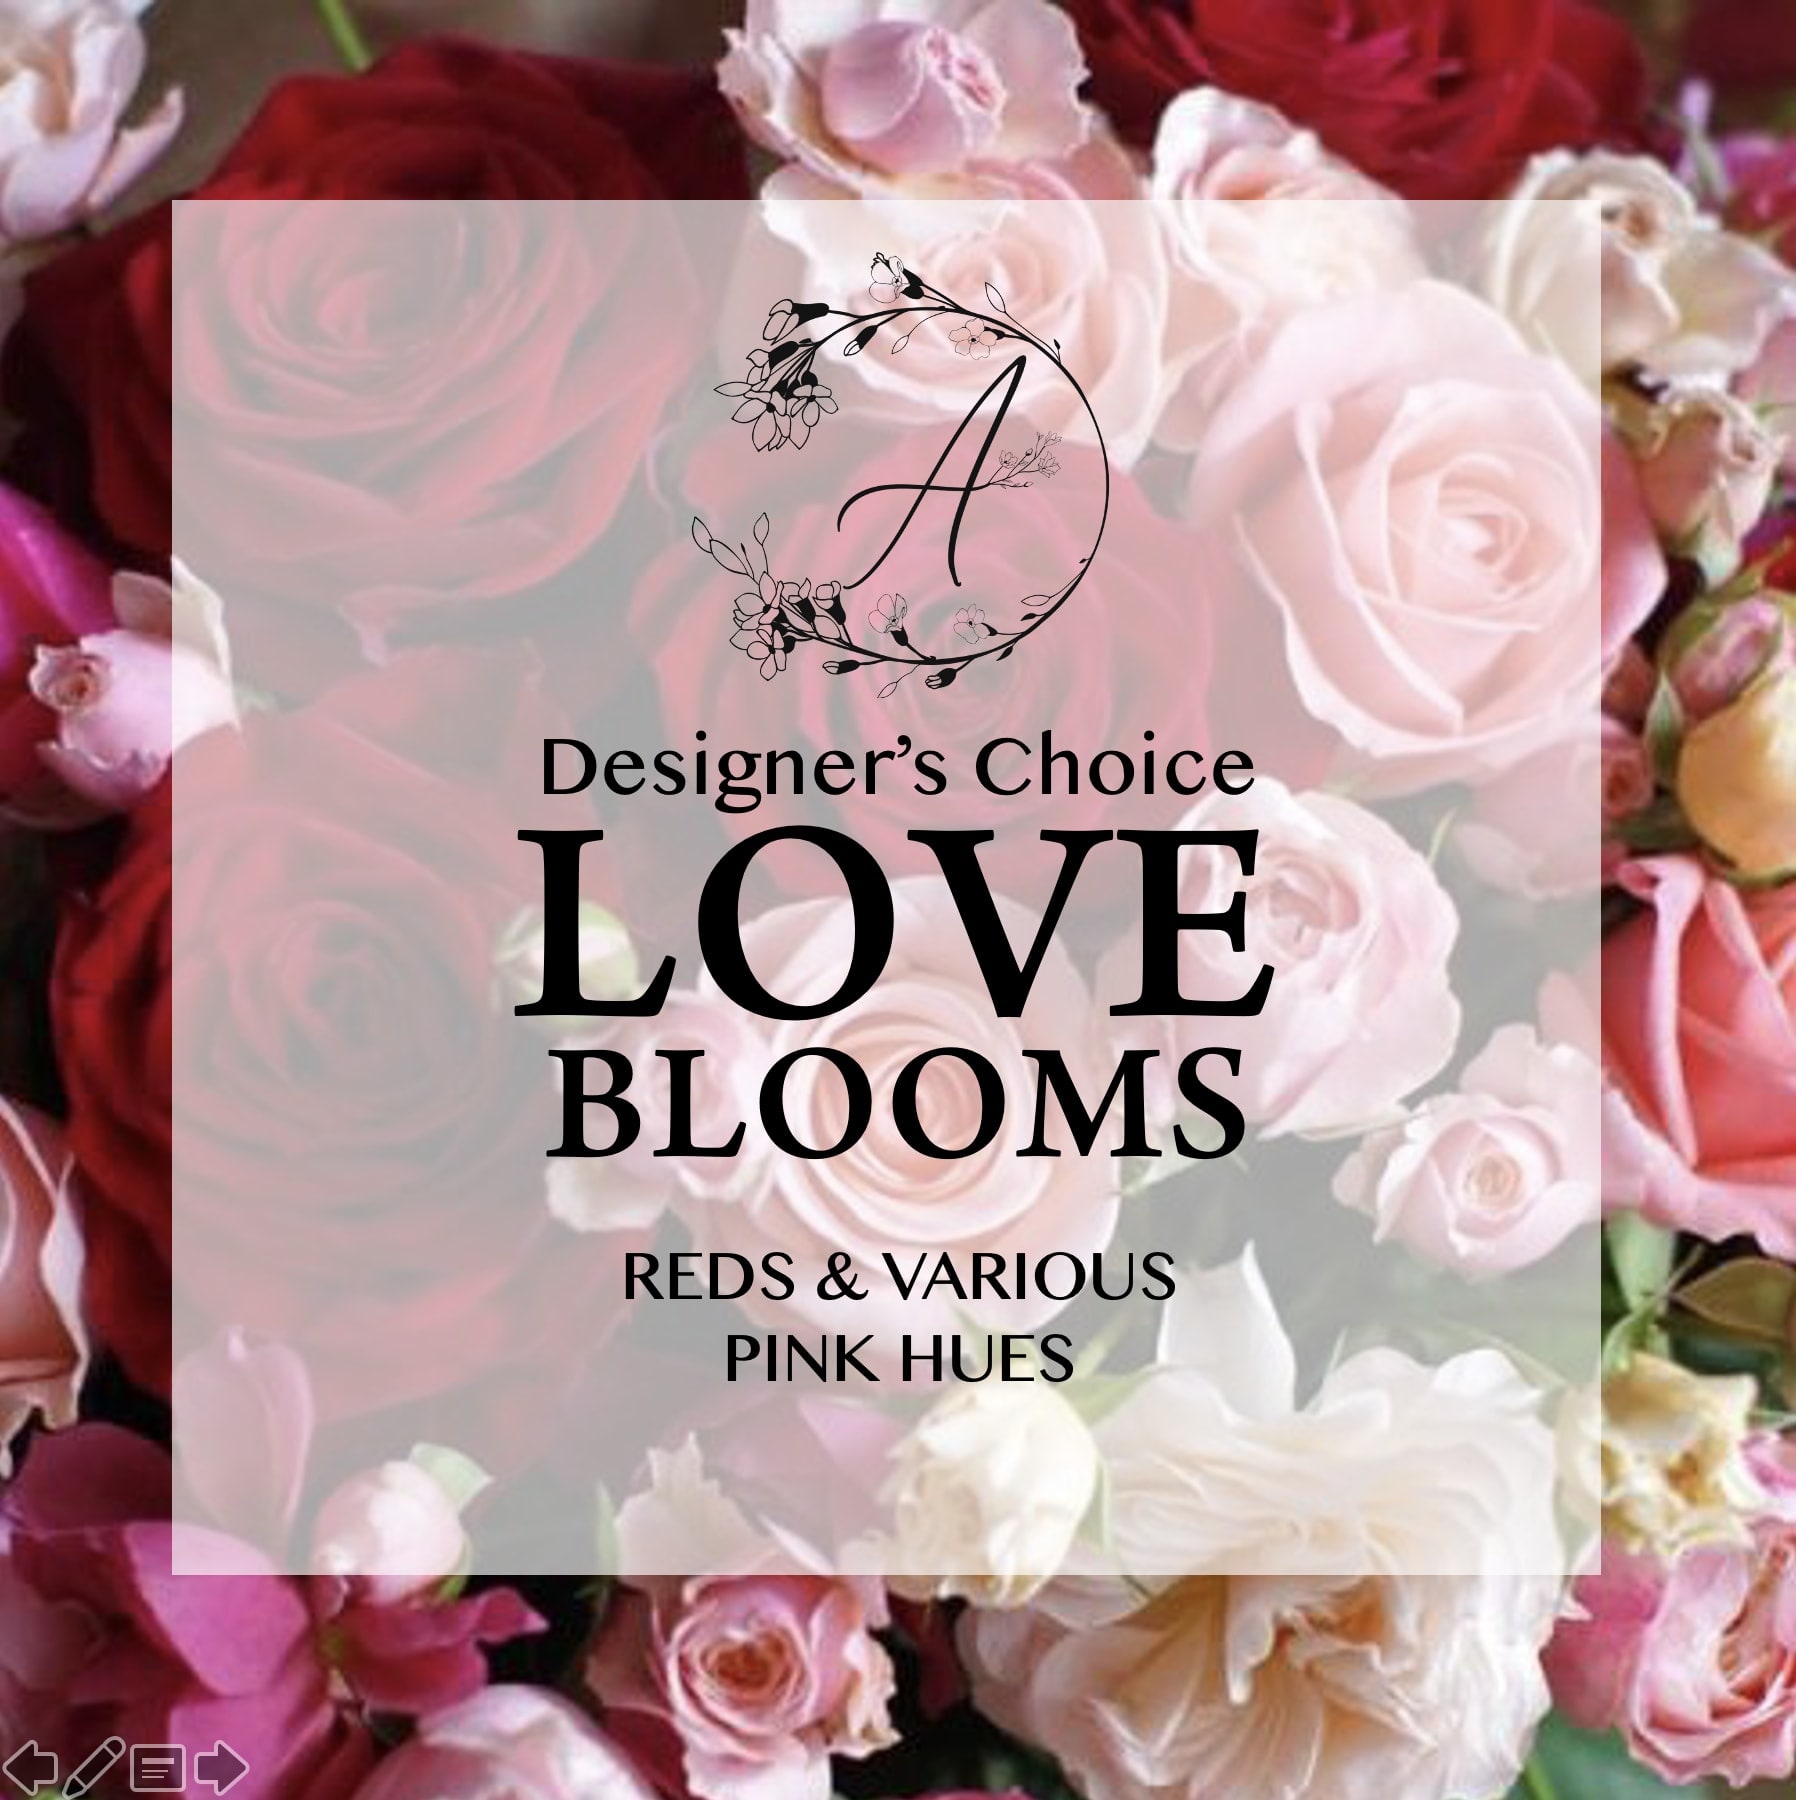 Love Blooms - Designer's Choice - Our designers will create a beautiful arrangement with the freshest blooms of the season, in romantic Valentine's Day shades such as reds, pinks, and whites. Usually is a compact arrangement. If you want a tall and airy, please request in the special instructions.  Flowers and containers may not reflect exactly as pictured. While we cannot guarantee a specific flower type, we always ensure your arrangement is beautiful, fresh and one of a kind!